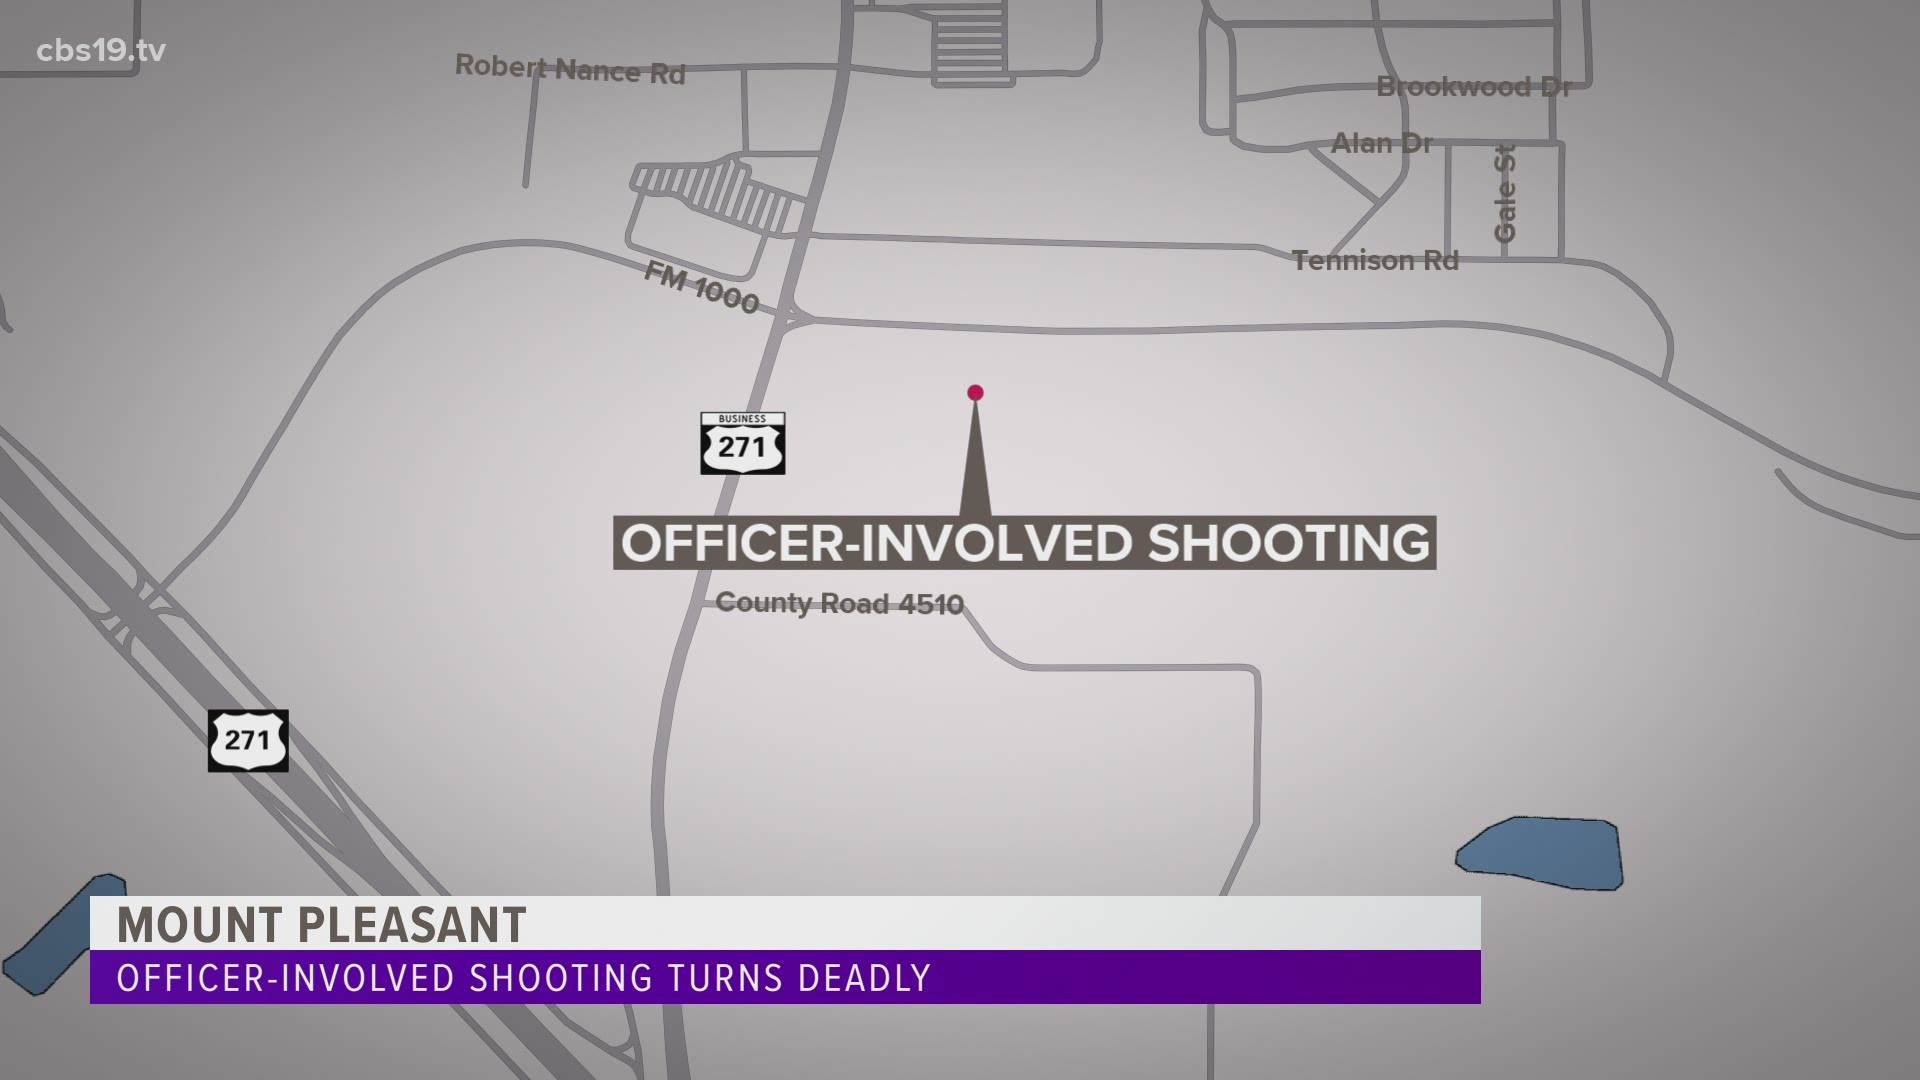 A man has died following an officer-involved shooting Wednesday afternoon in Mount Pleasant.